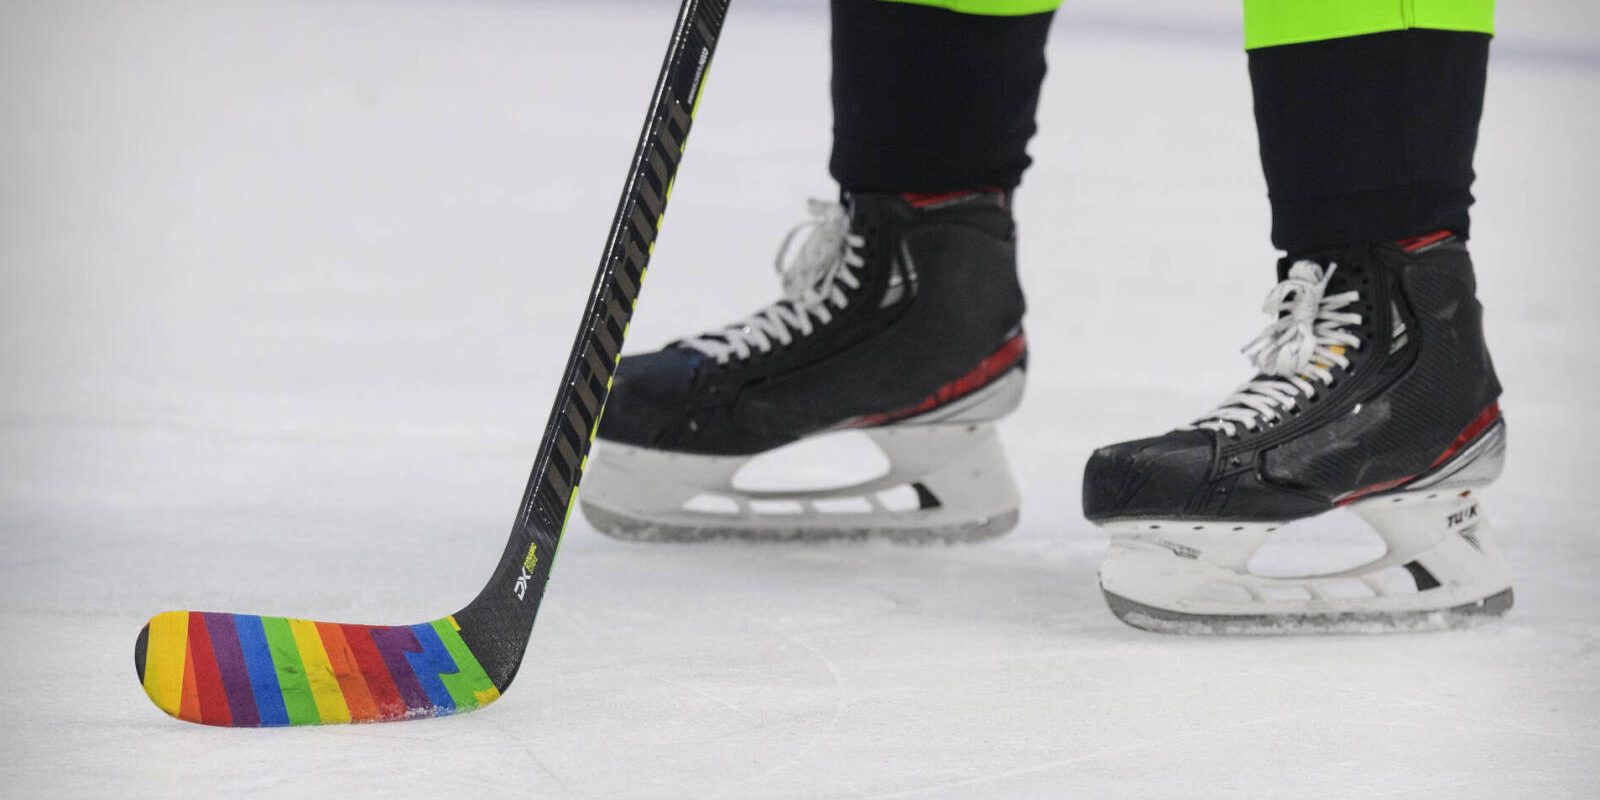 Apr 26, 2021; Dallas, Texas, USA;  A view of the rainbow color tape on the hockey stick of Dallas Stars right wing Denis Gurianov (34) in recognition of NHL pride night before the game between the Dallas Stars and the Carolina Hurricanes at the American Airlines Center. Mandatory Credit: Jerome Miron-USA TODAY Sports